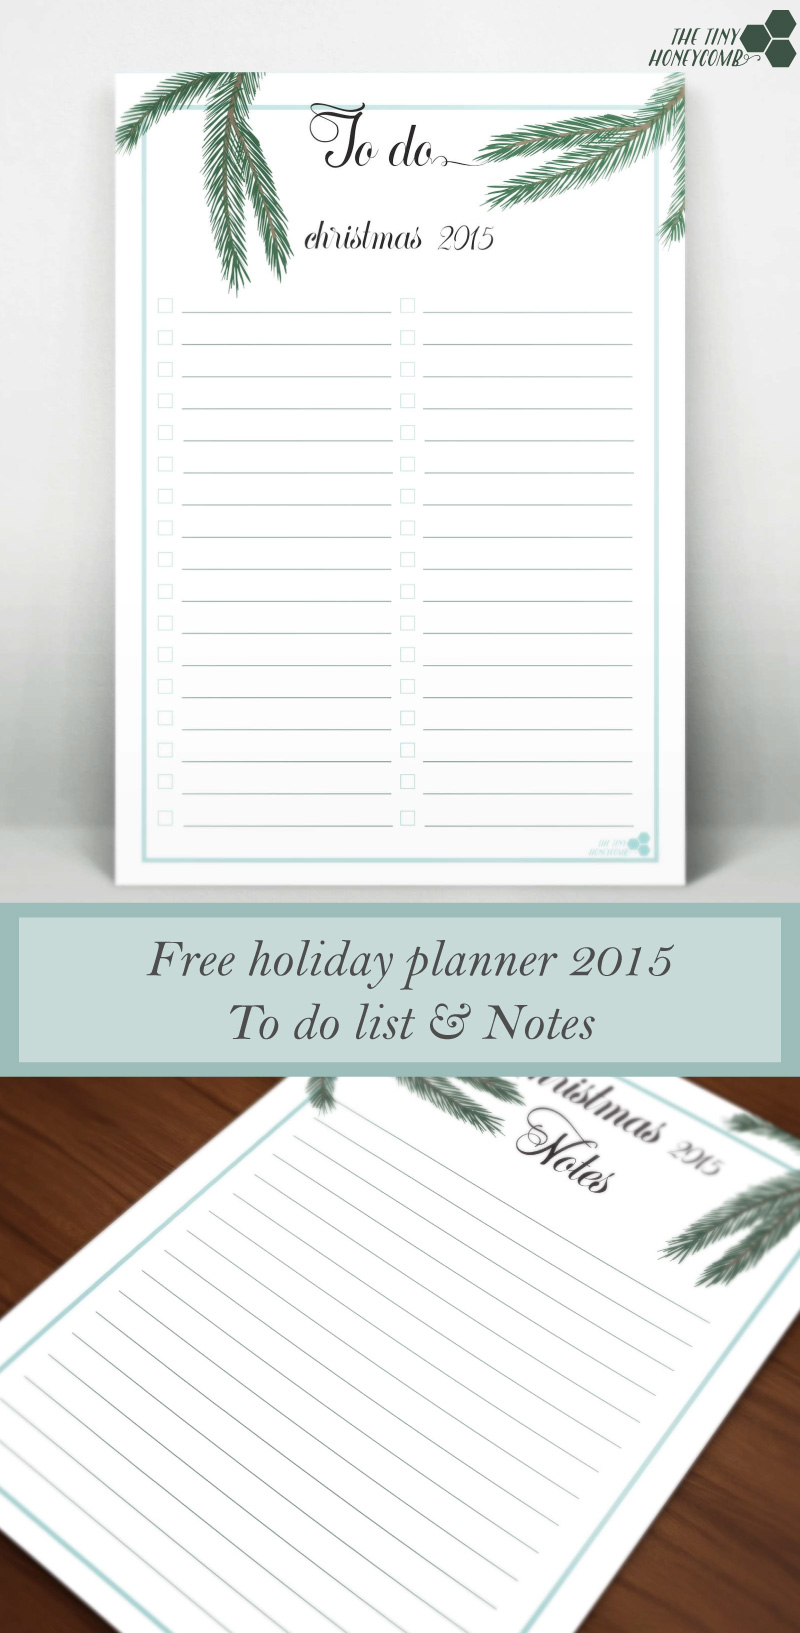 Notes and To do Printable lists for this christmas. Free Christmas planner 2015